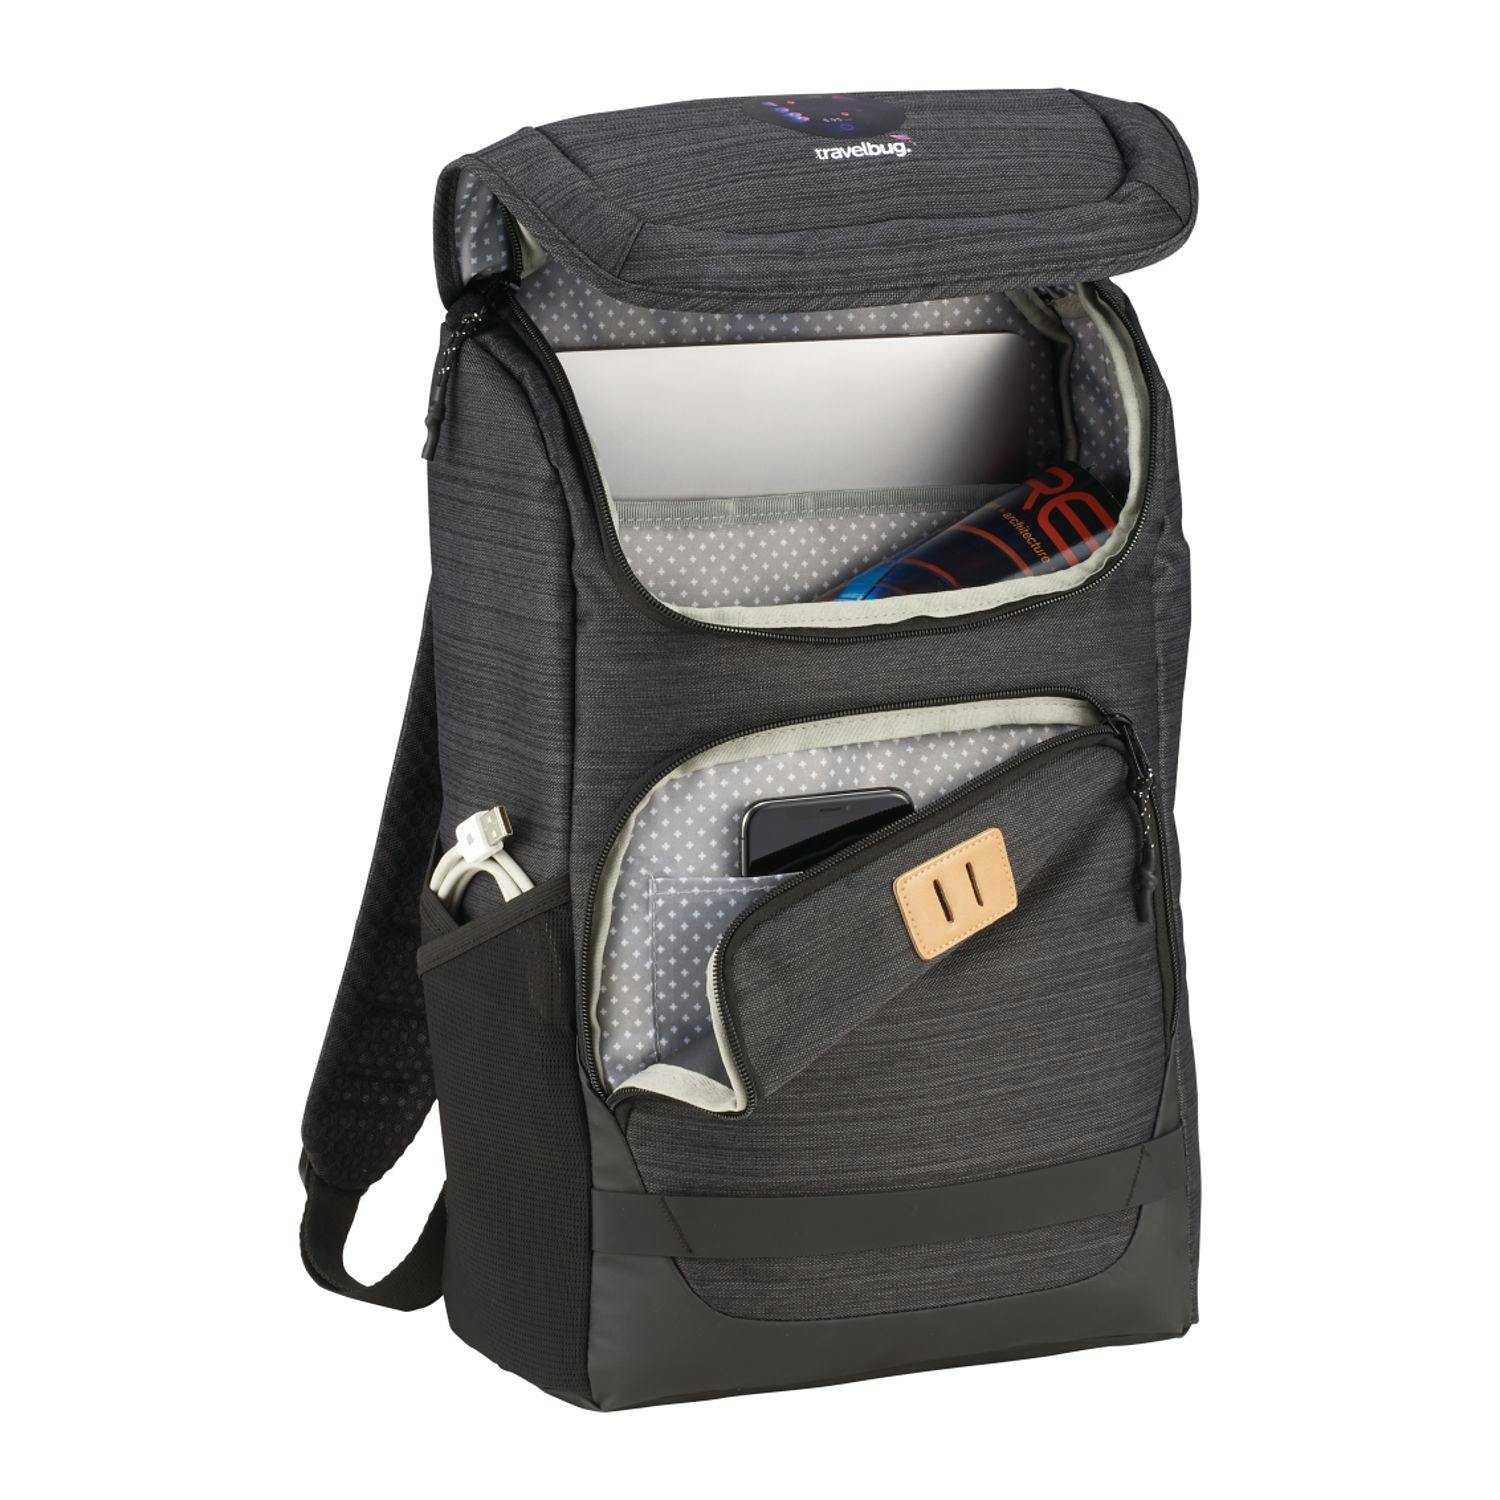 NBN Mayfair 15" Computer Backpack - additional Image 1